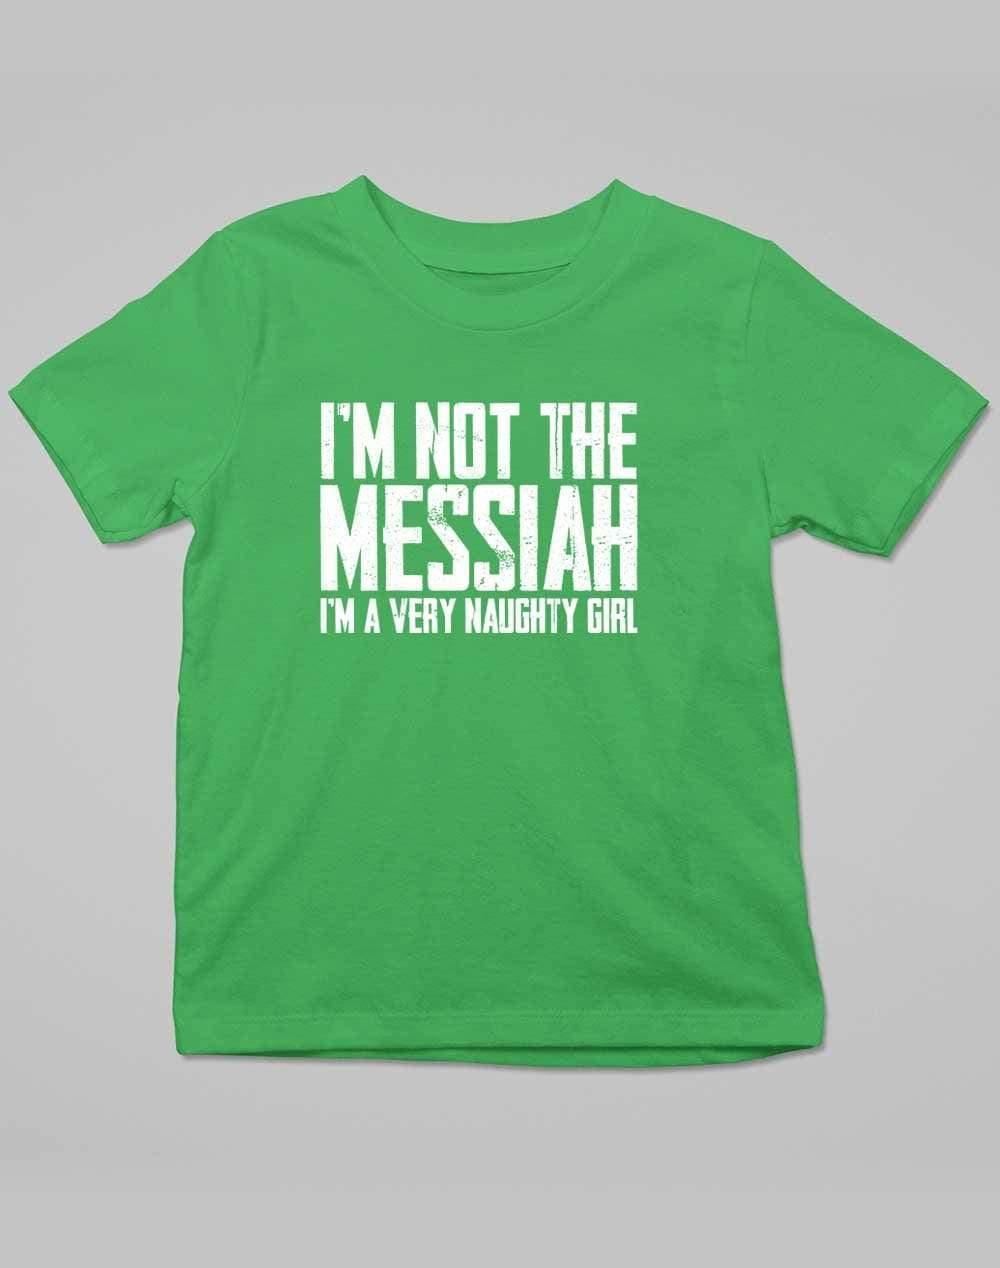 I'm Not the Messiah I'm a Very Naughty Girl Kids T-Shirt 3-4 years / Kelly Green  - Off World Tees